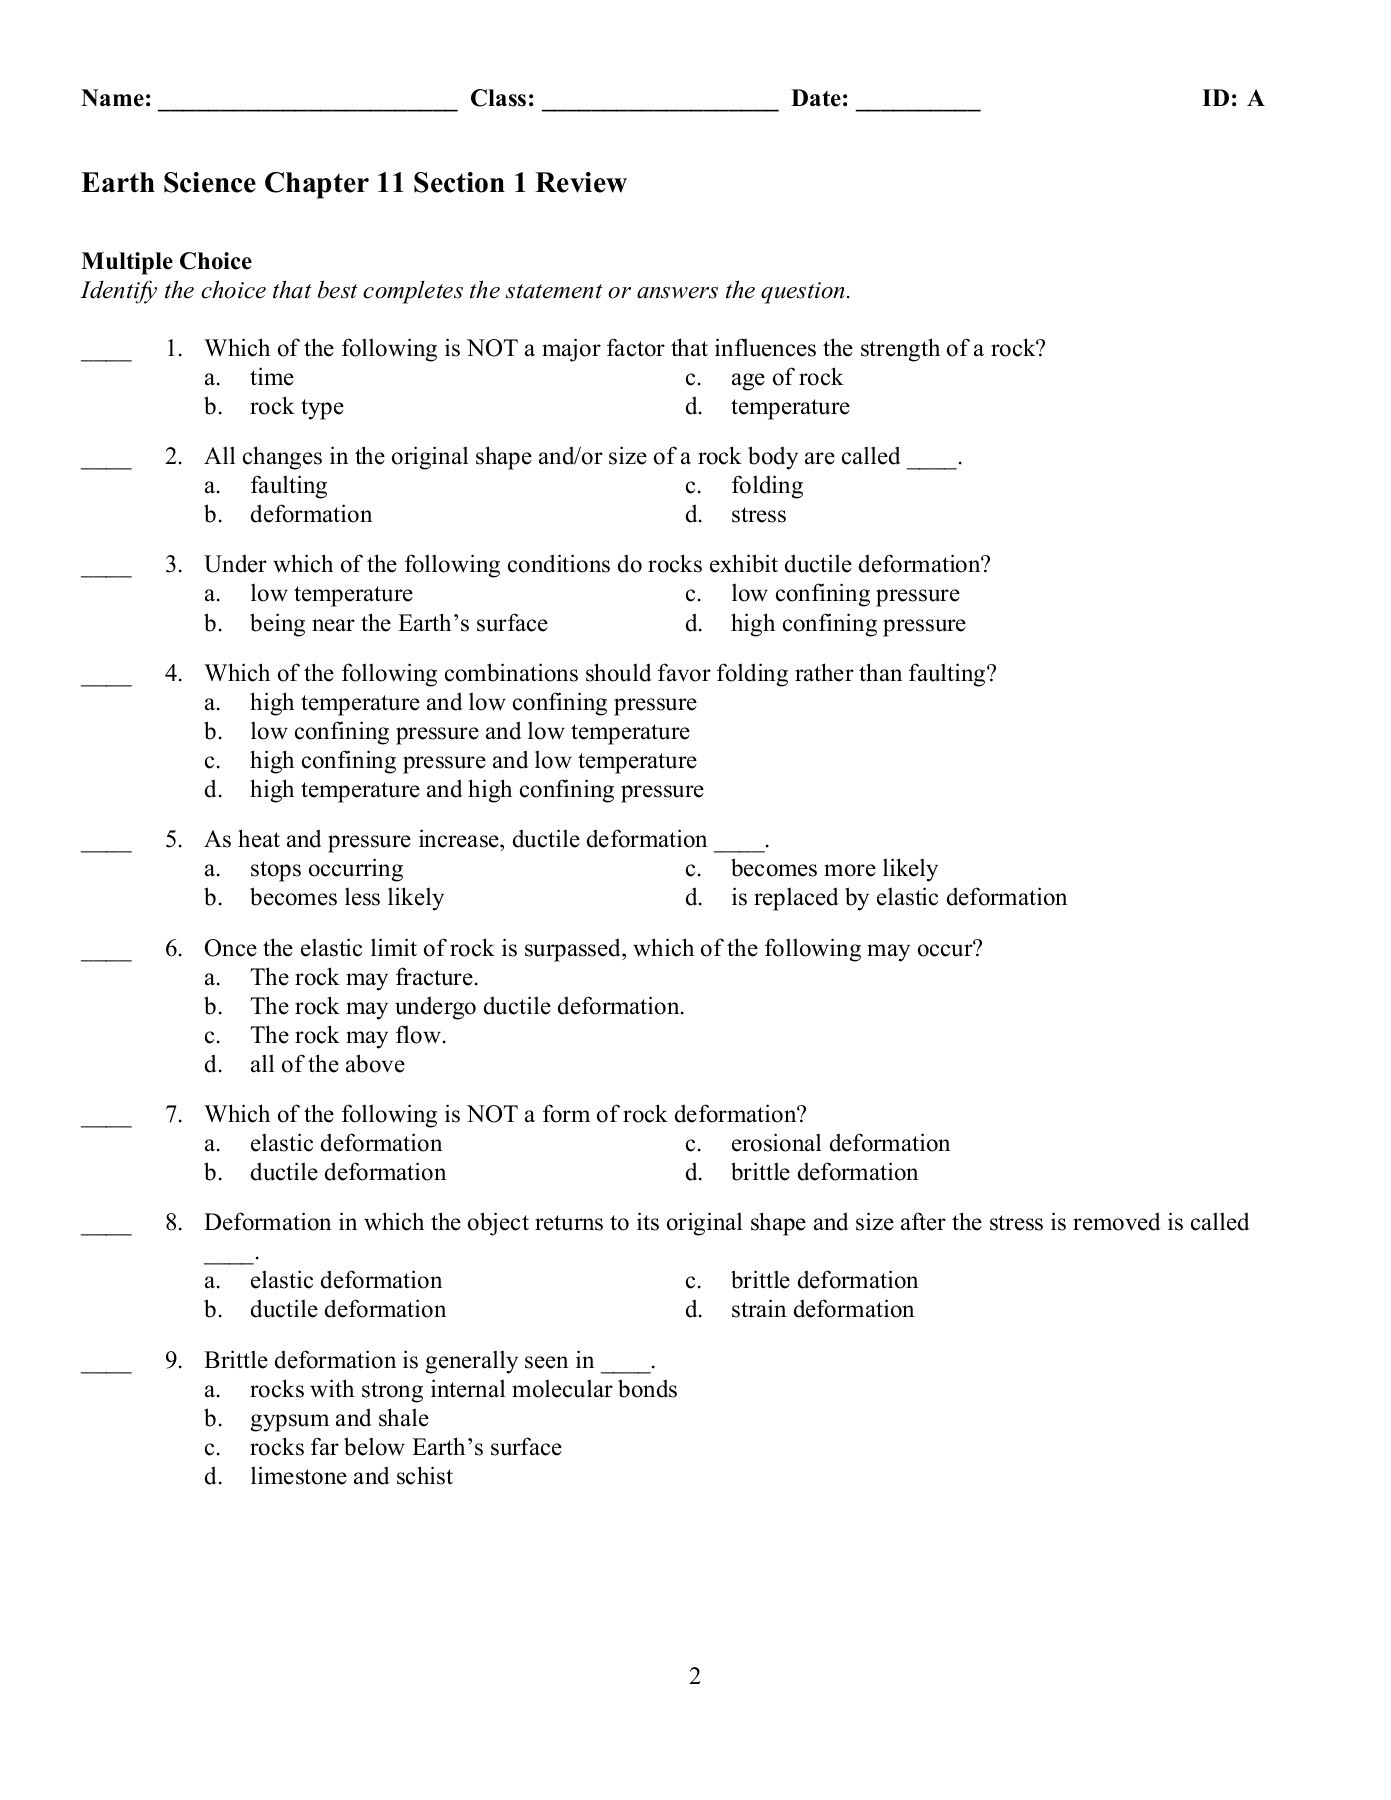 Earth Science Chapter 2 Review Answers The Earth Images Revimage Org